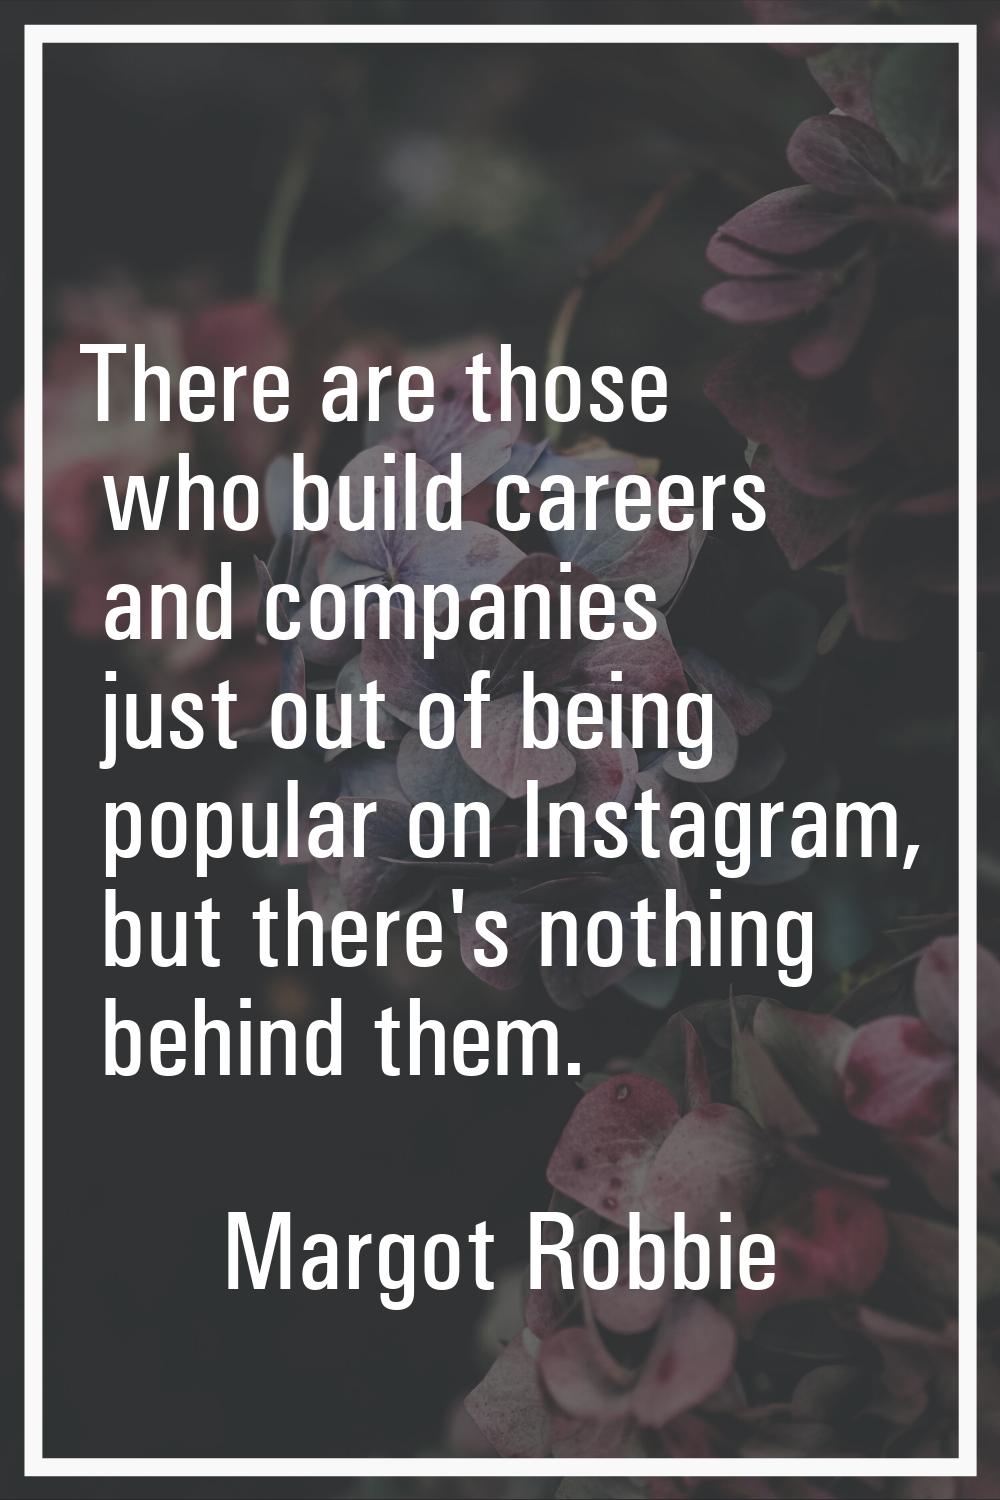 There are those who build careers and companies just out of being popular on Instagram, but there's